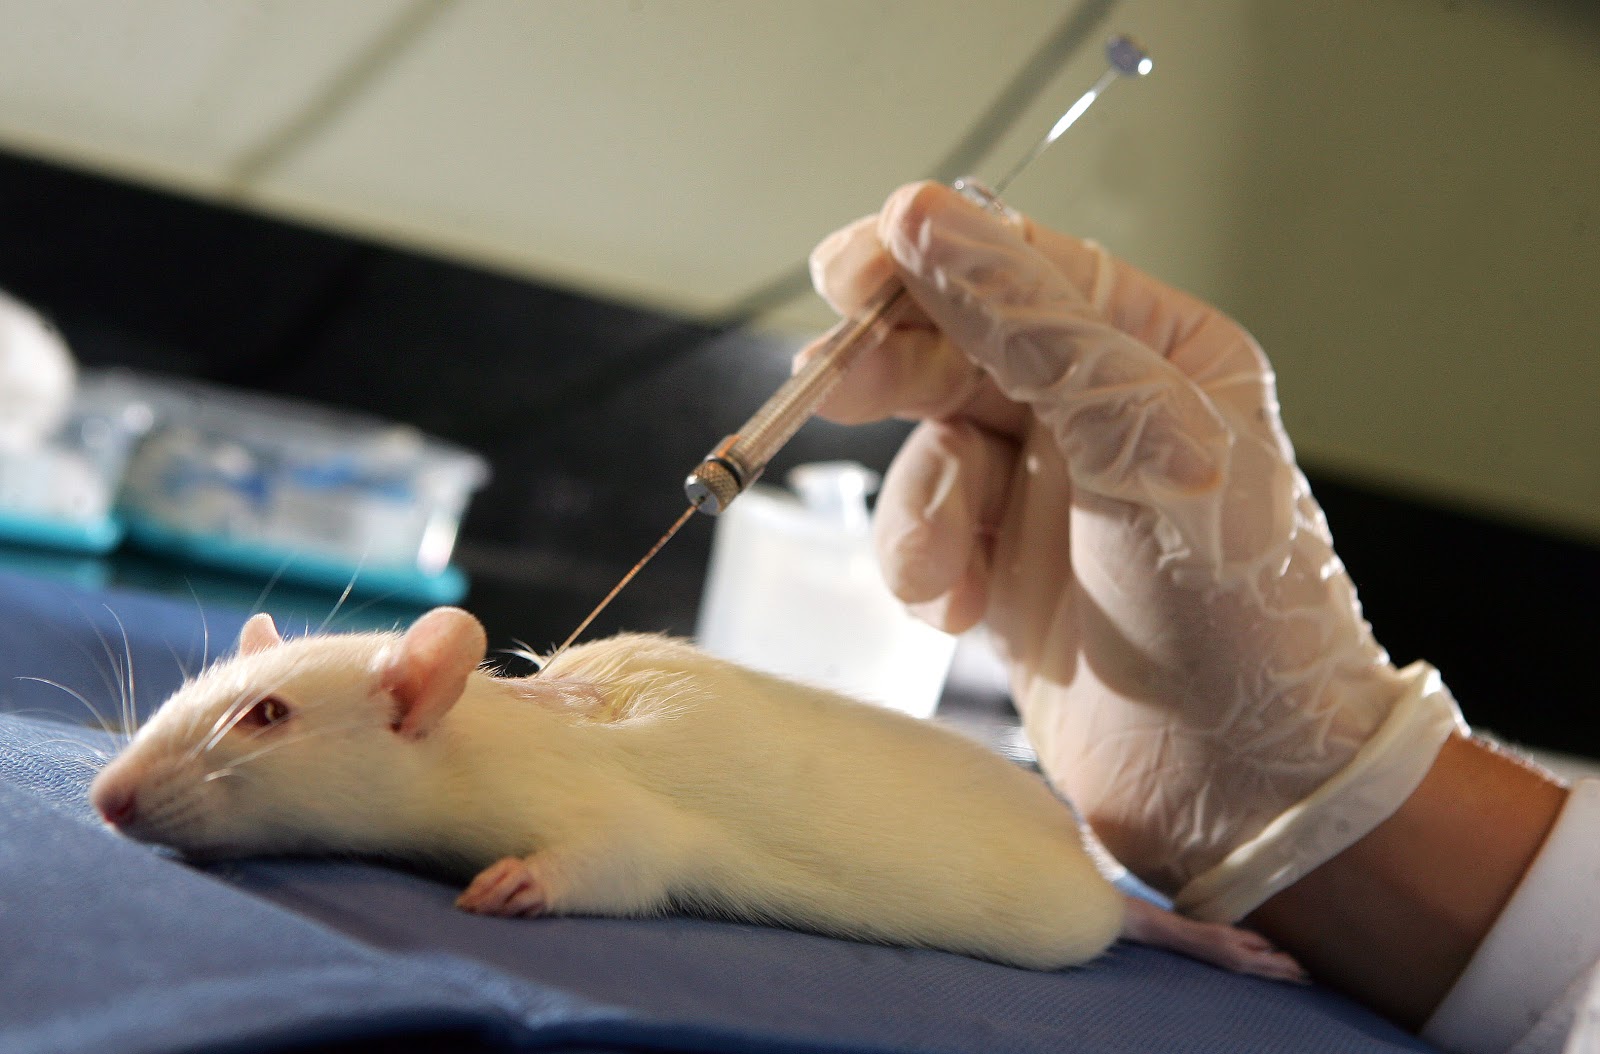 medical research on animals should be discontinued